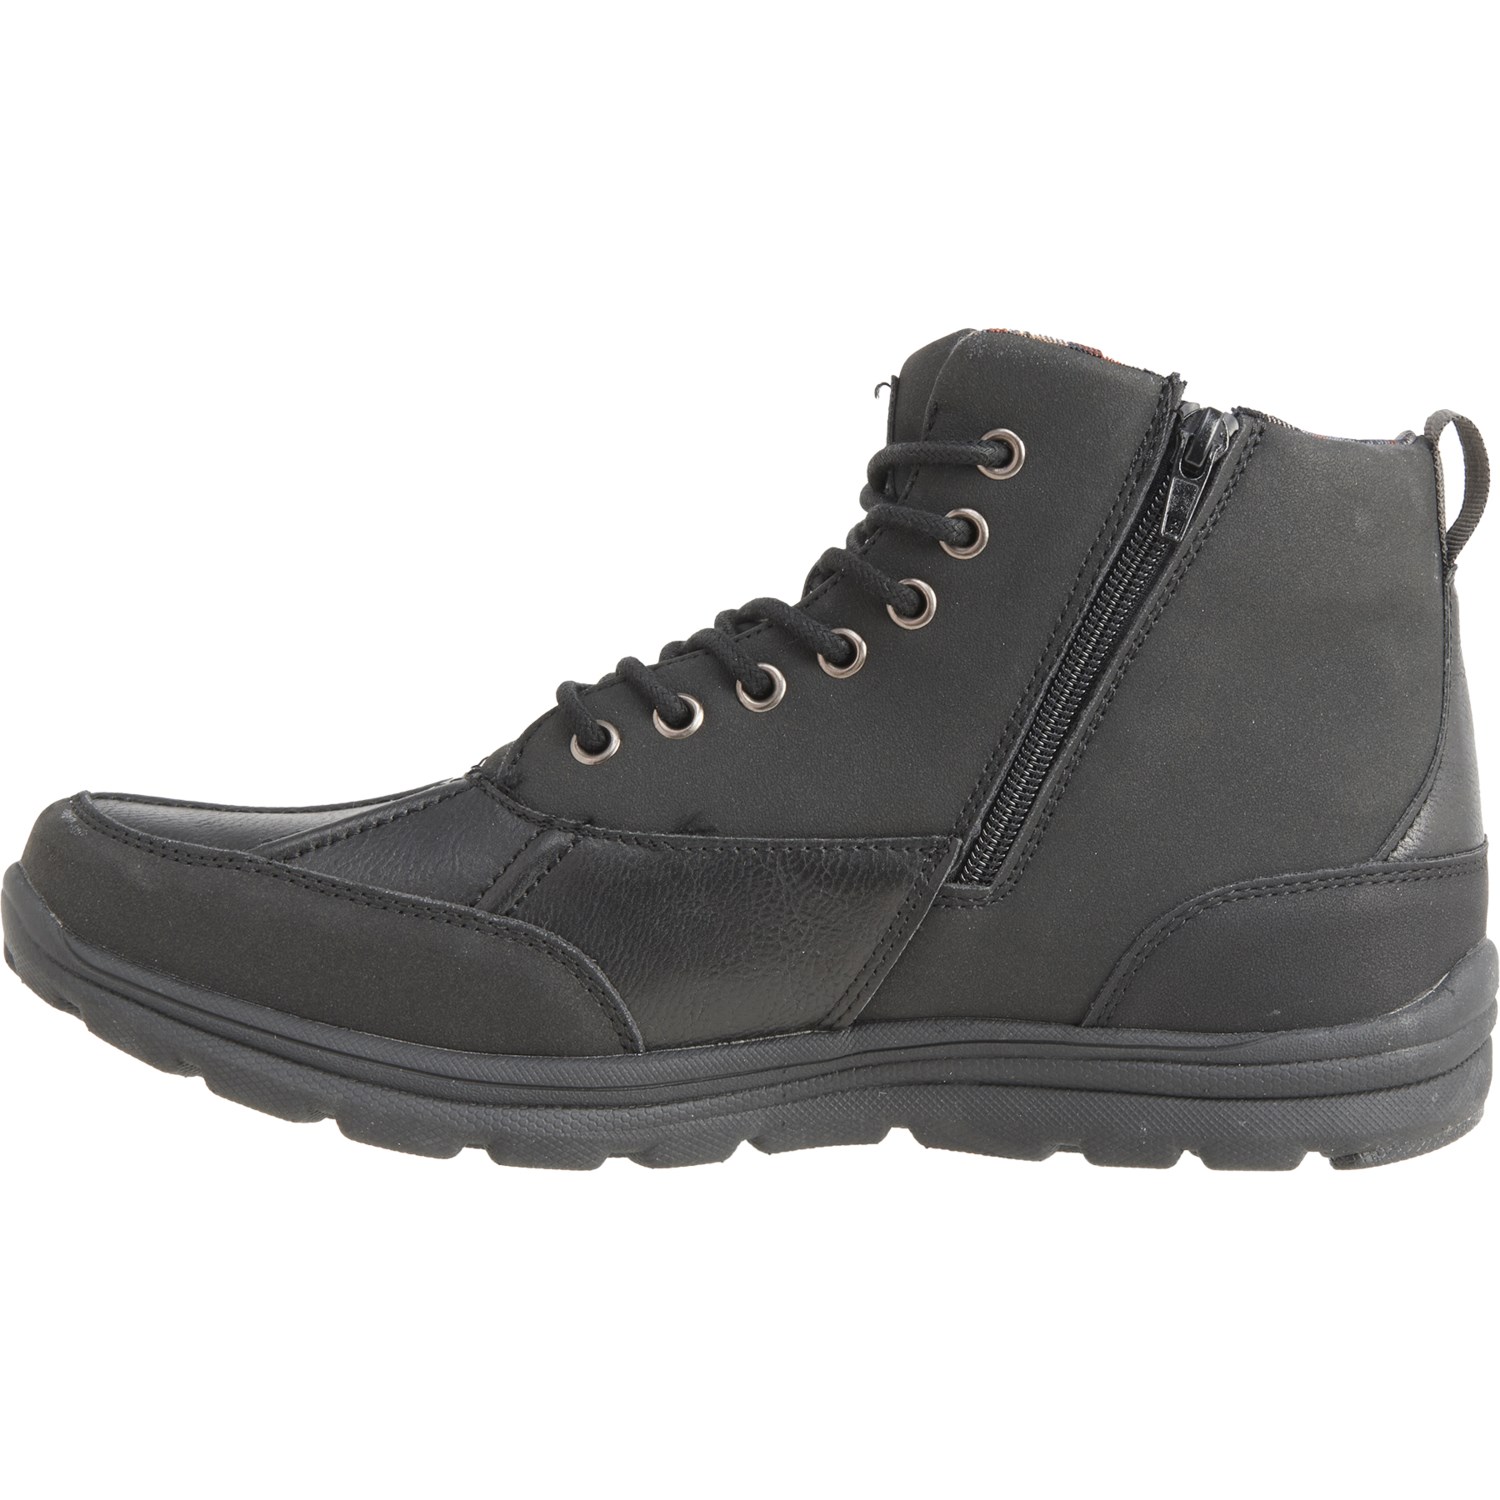 B-52 by Bullboxer Boots (For Men) - Save 68%